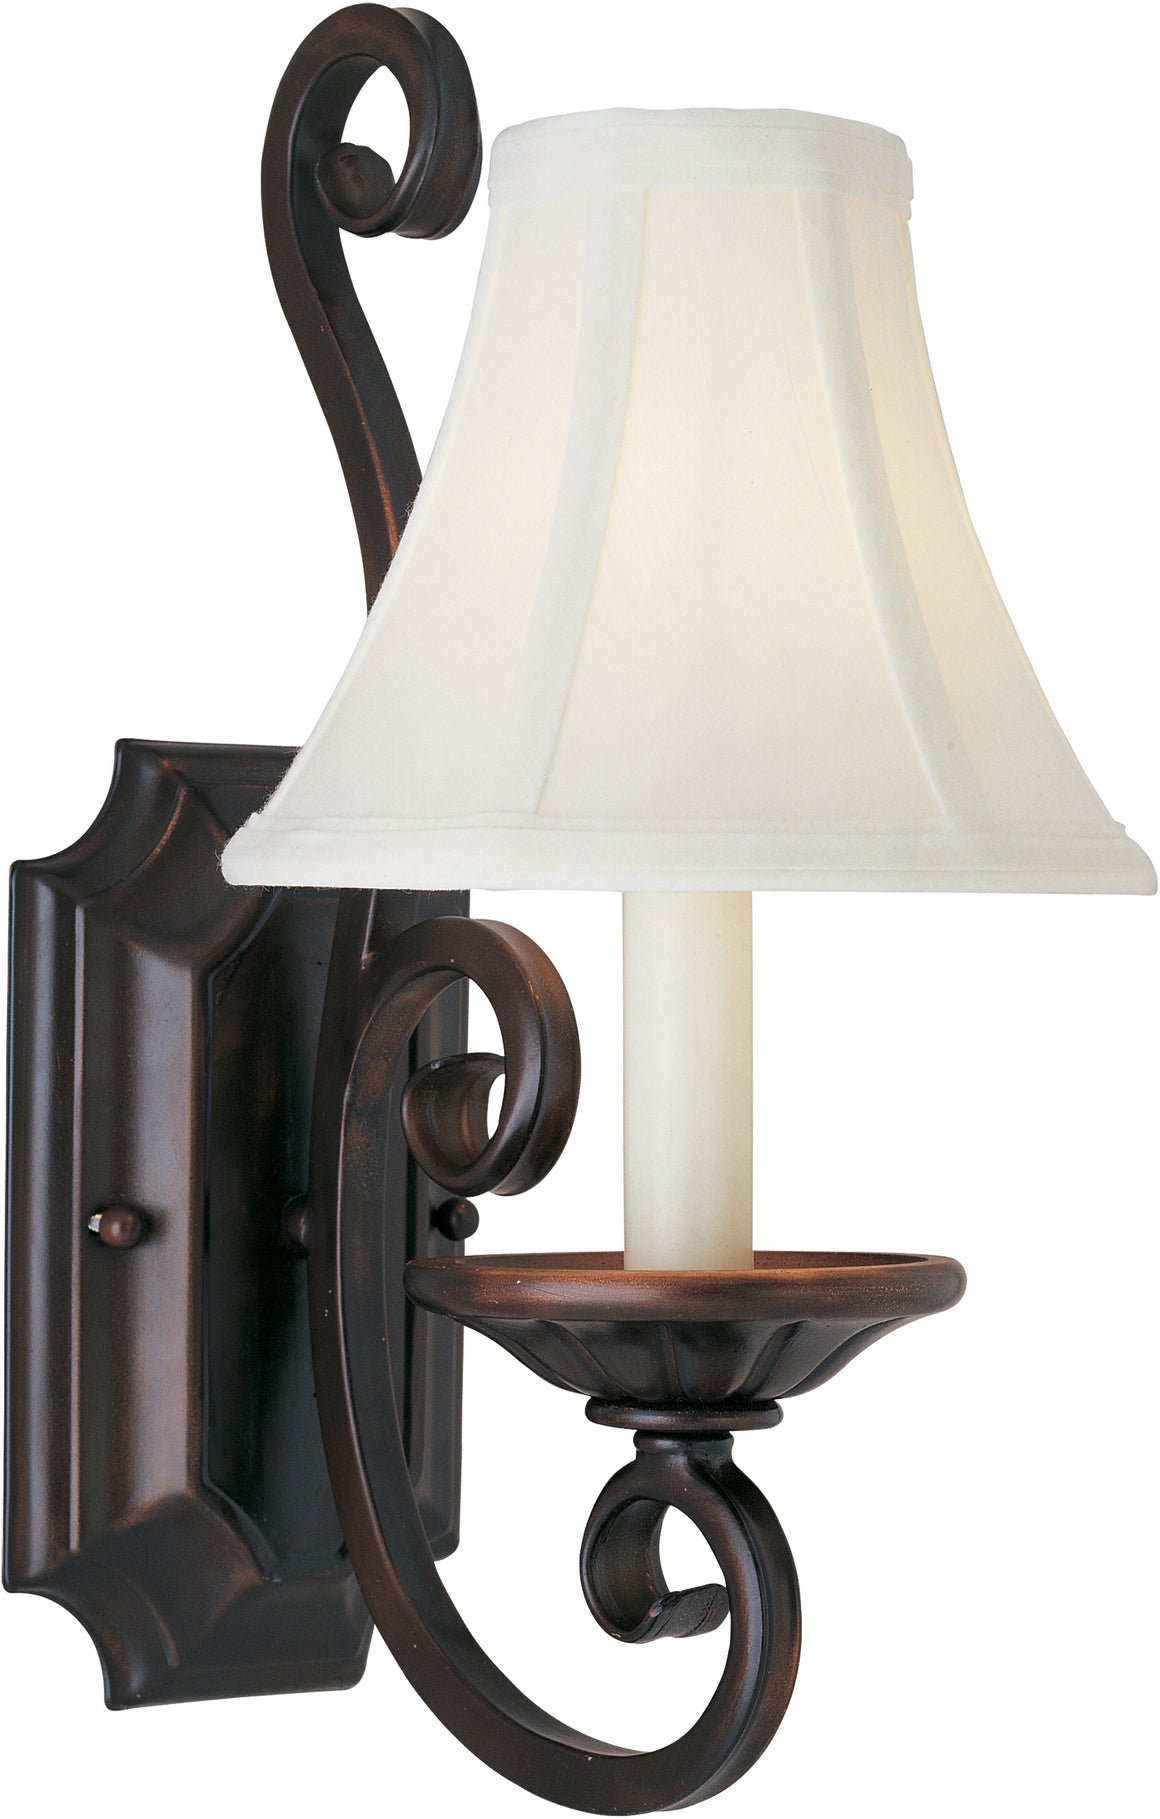 Manor 1-Light Wall Sconce with Shades